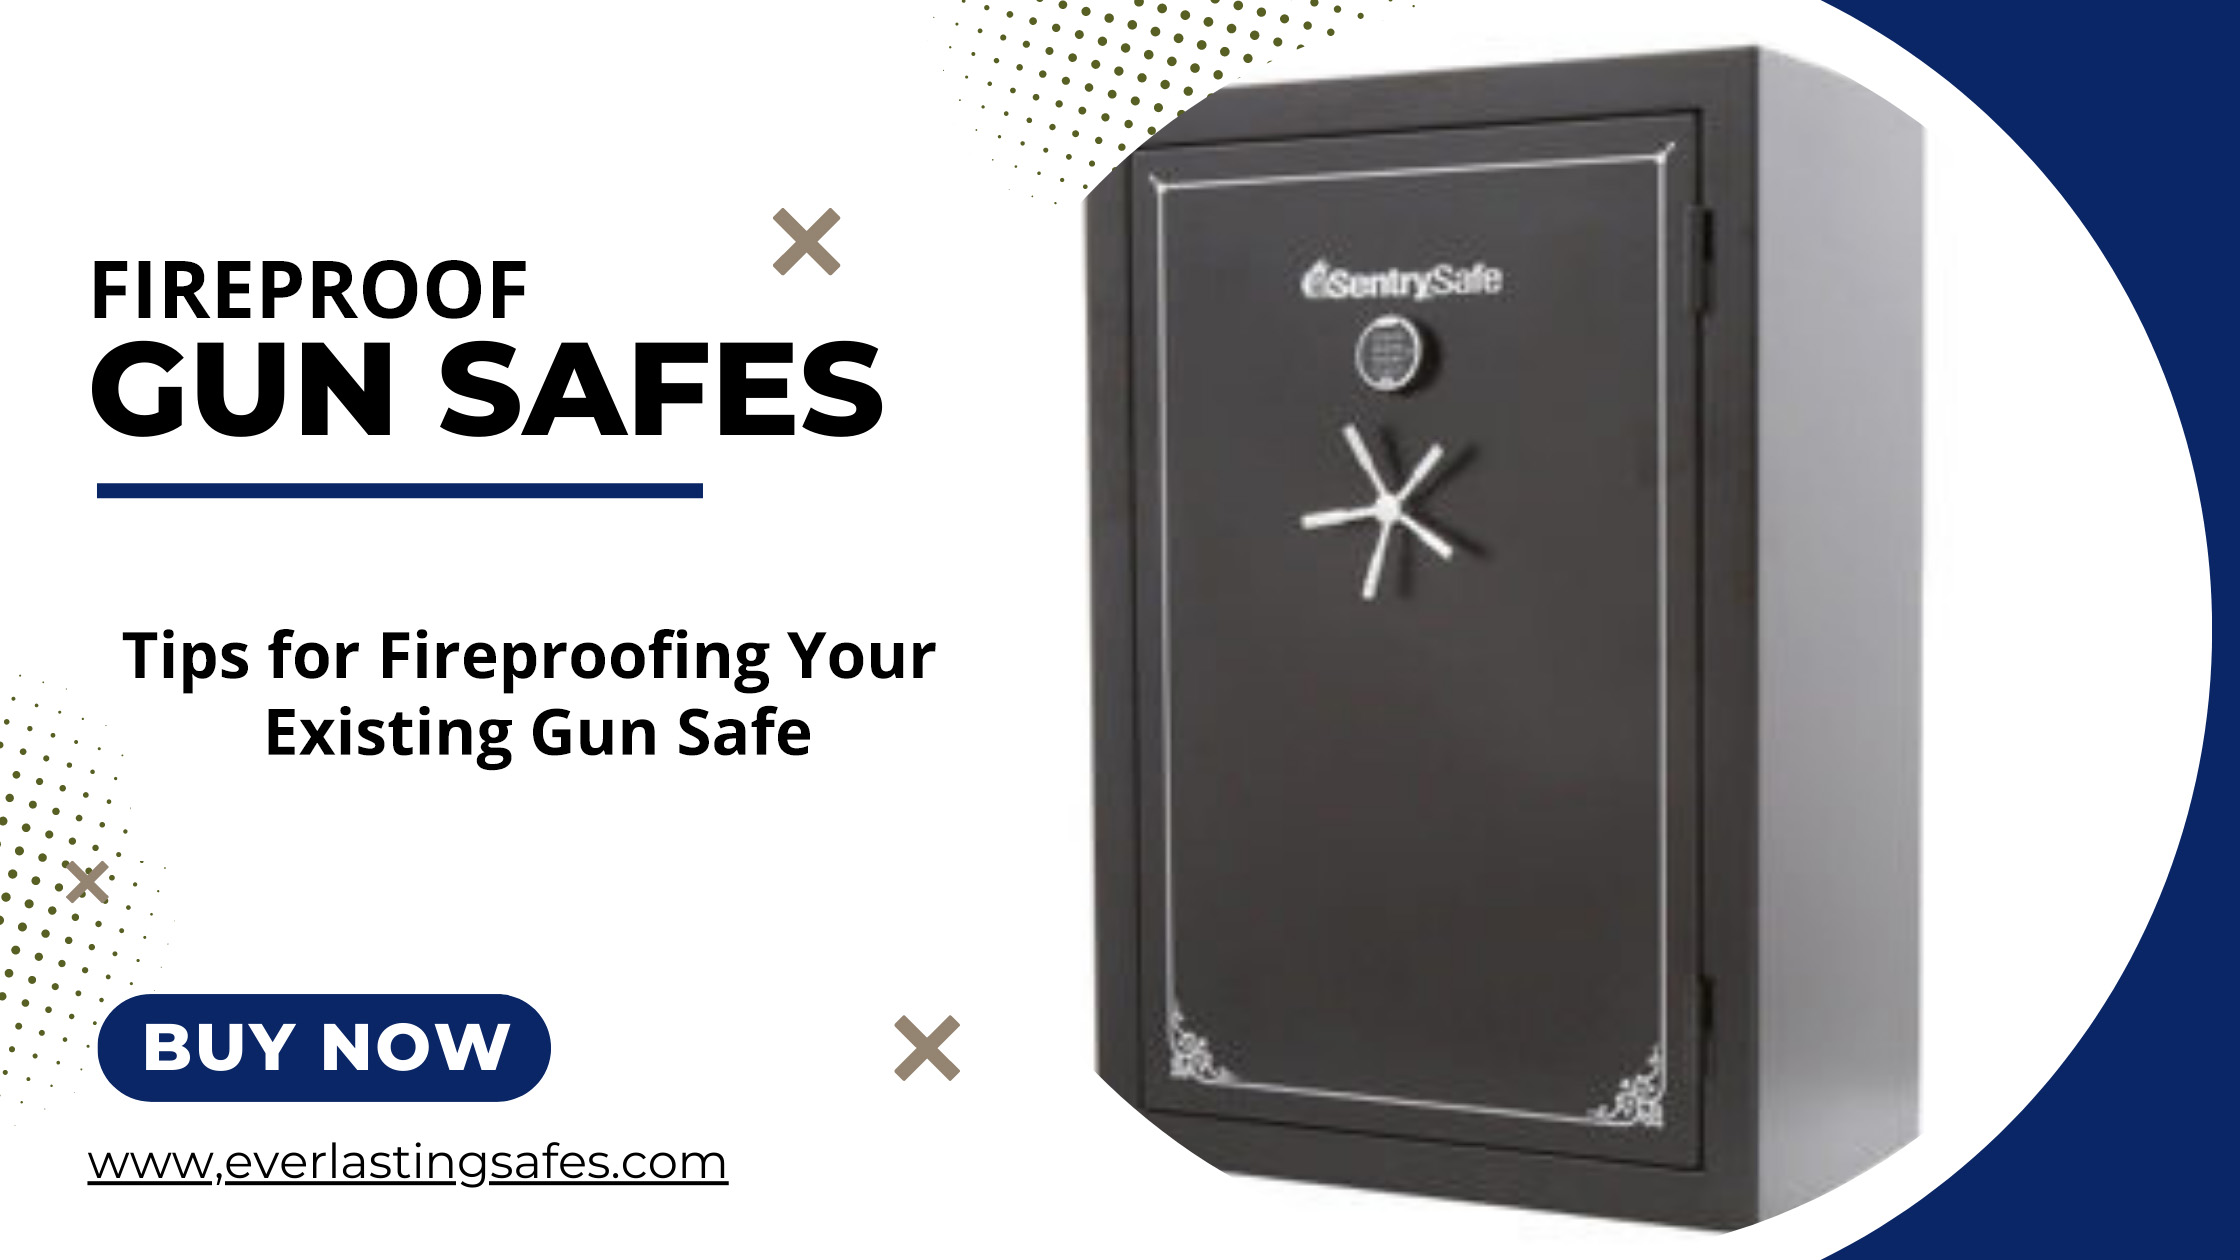 Tips for Fireproofing Your Existing Gun Safe